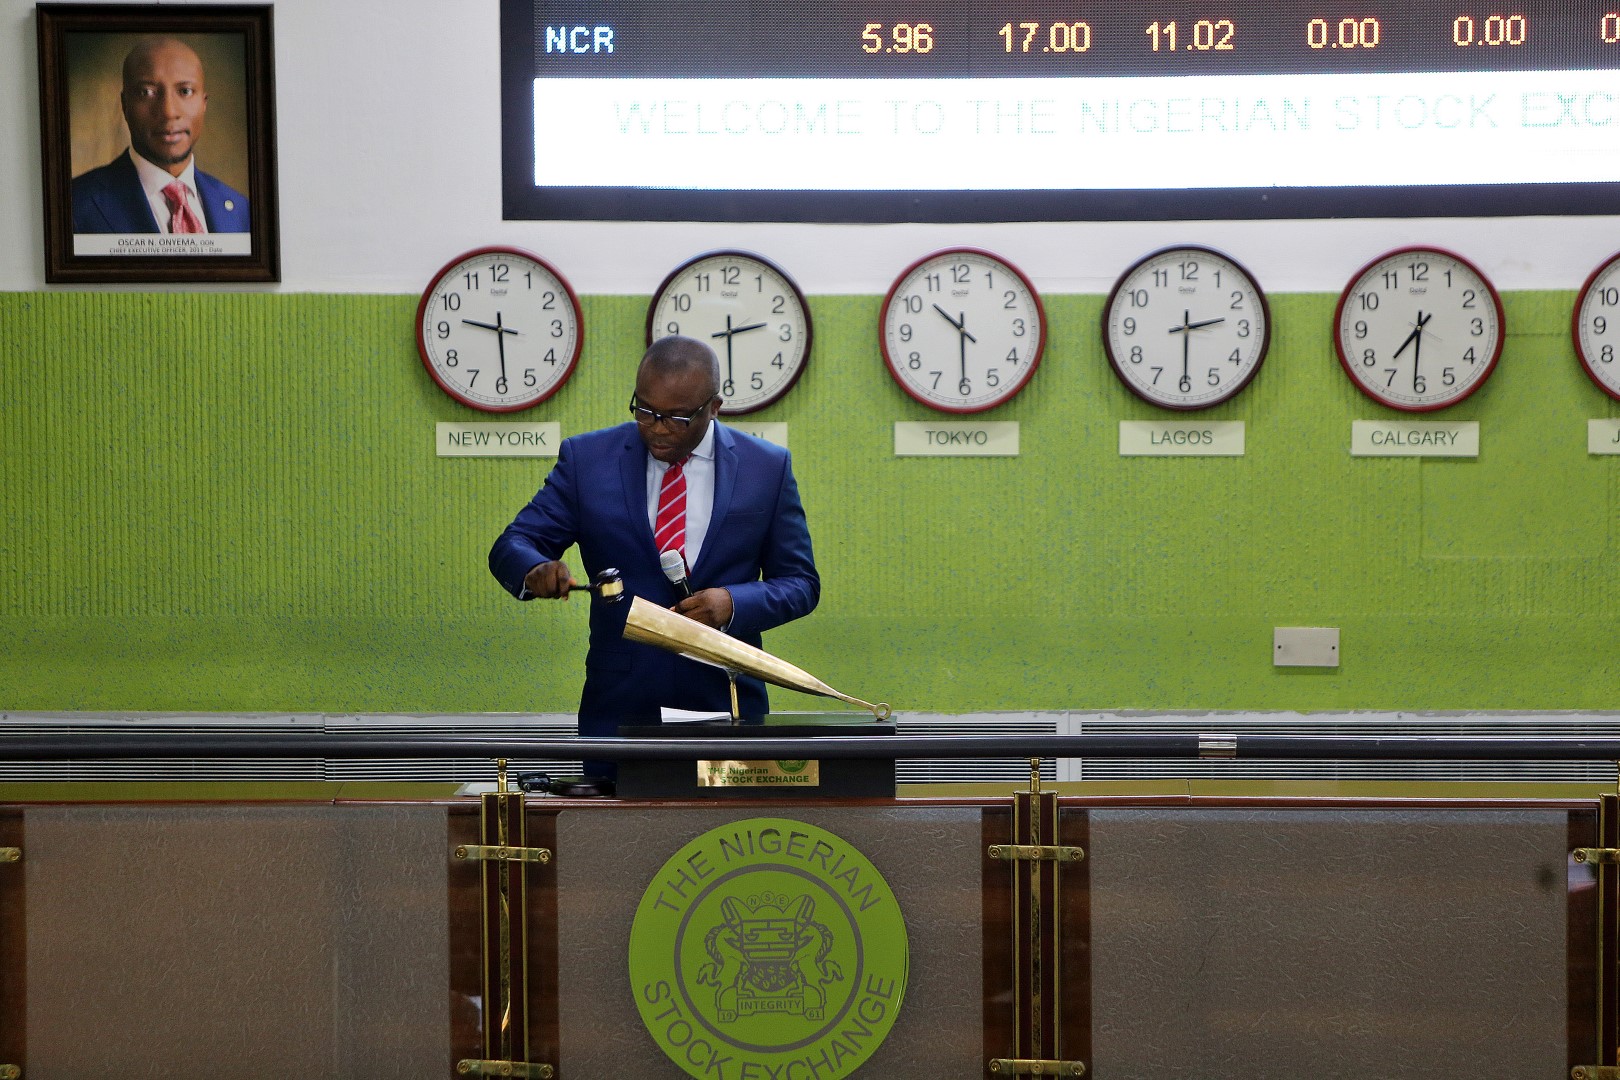 An employee rings the opening bell on the trading floor at the Nigerian Stock Exchange (NSE) in Lagos, Nigeria, on Monday, Oct. 26, 2015. Nigeria plans to create a $25 billion fund with public and private financing to modernize infrastructure and avoid a recession, Vice President Yemi Osinbajo said. Photographer: George Osodi/Bloomberg